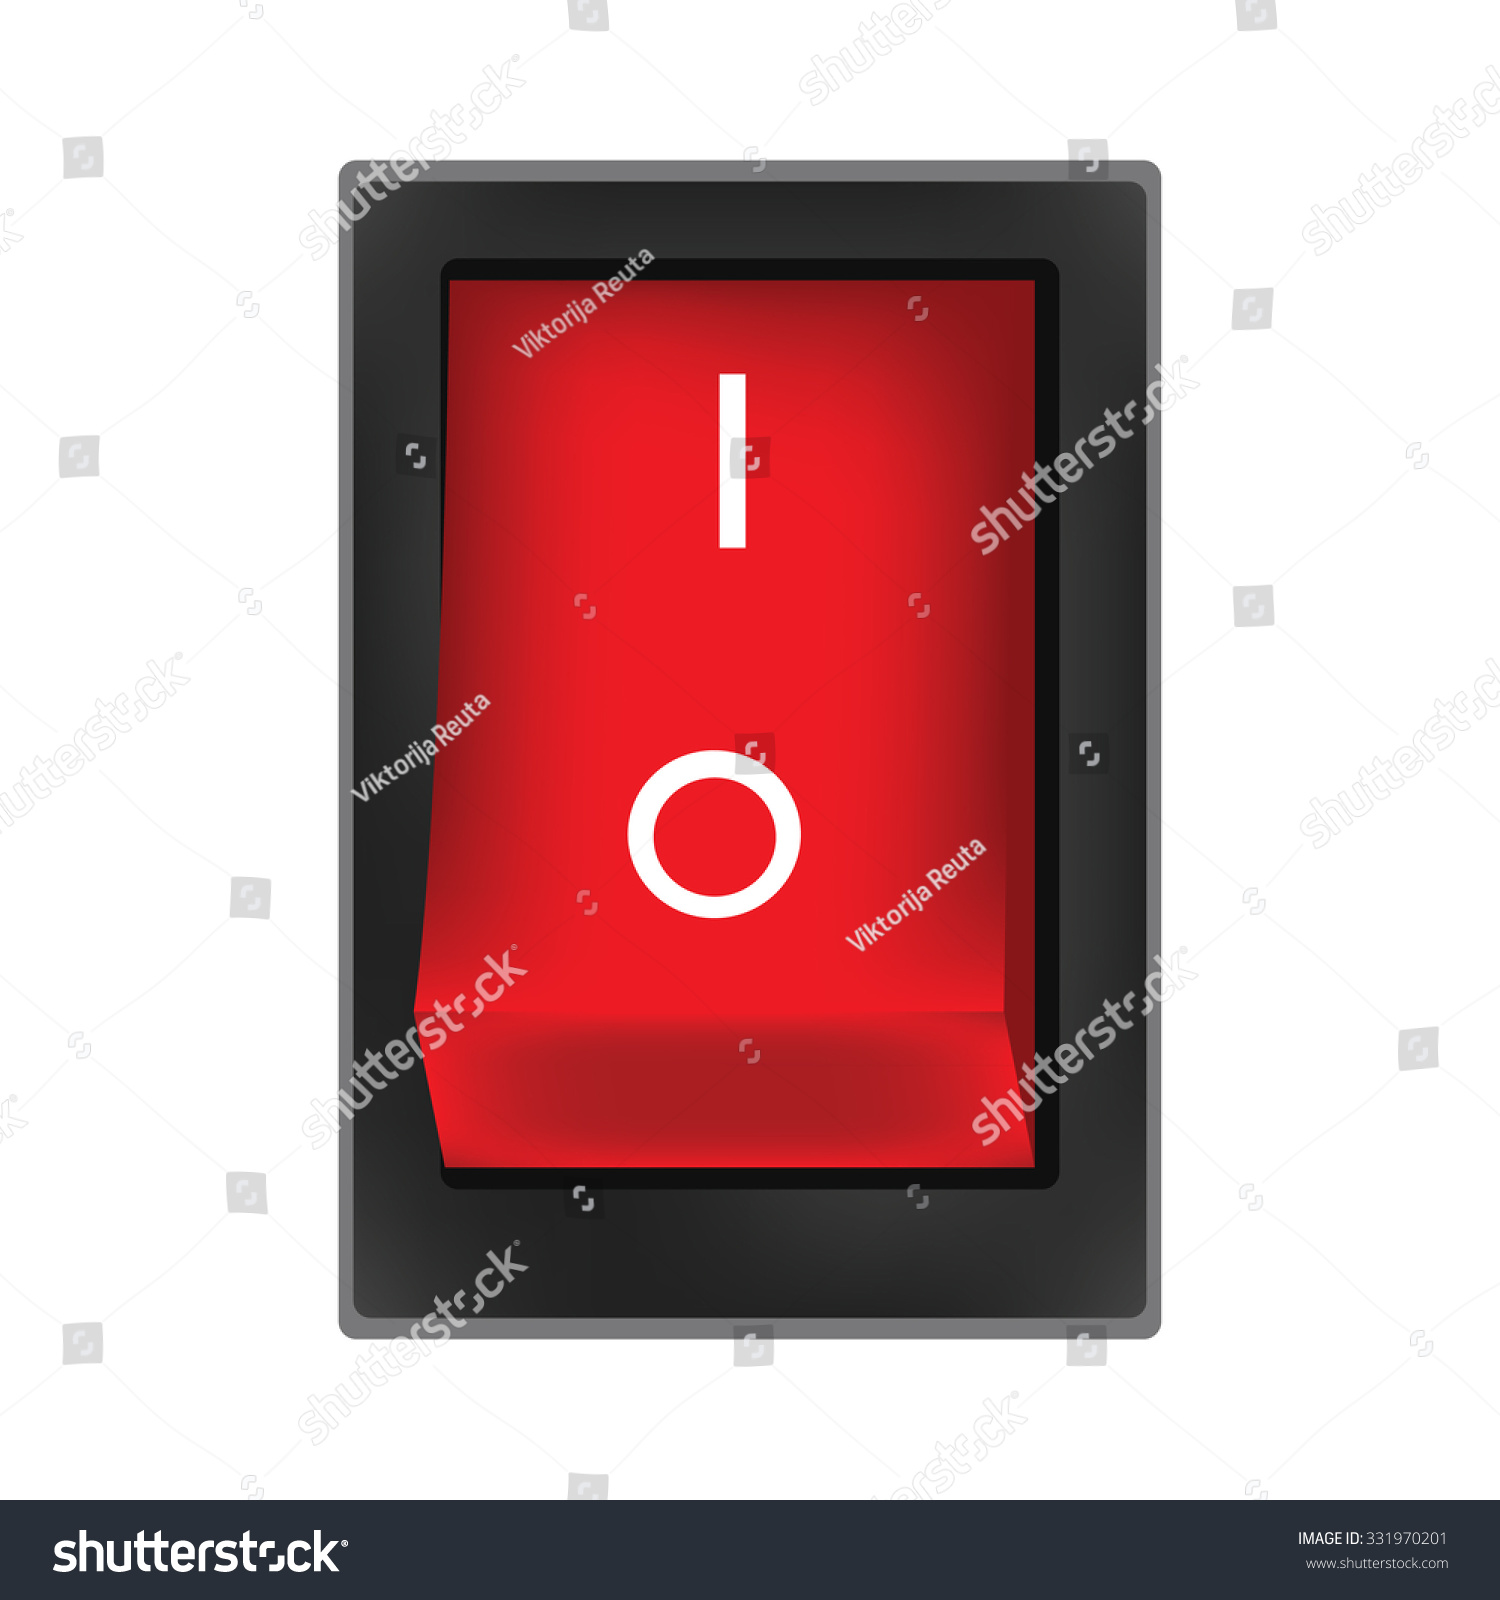 Red switch on button raster, on off button, on icon #331970201